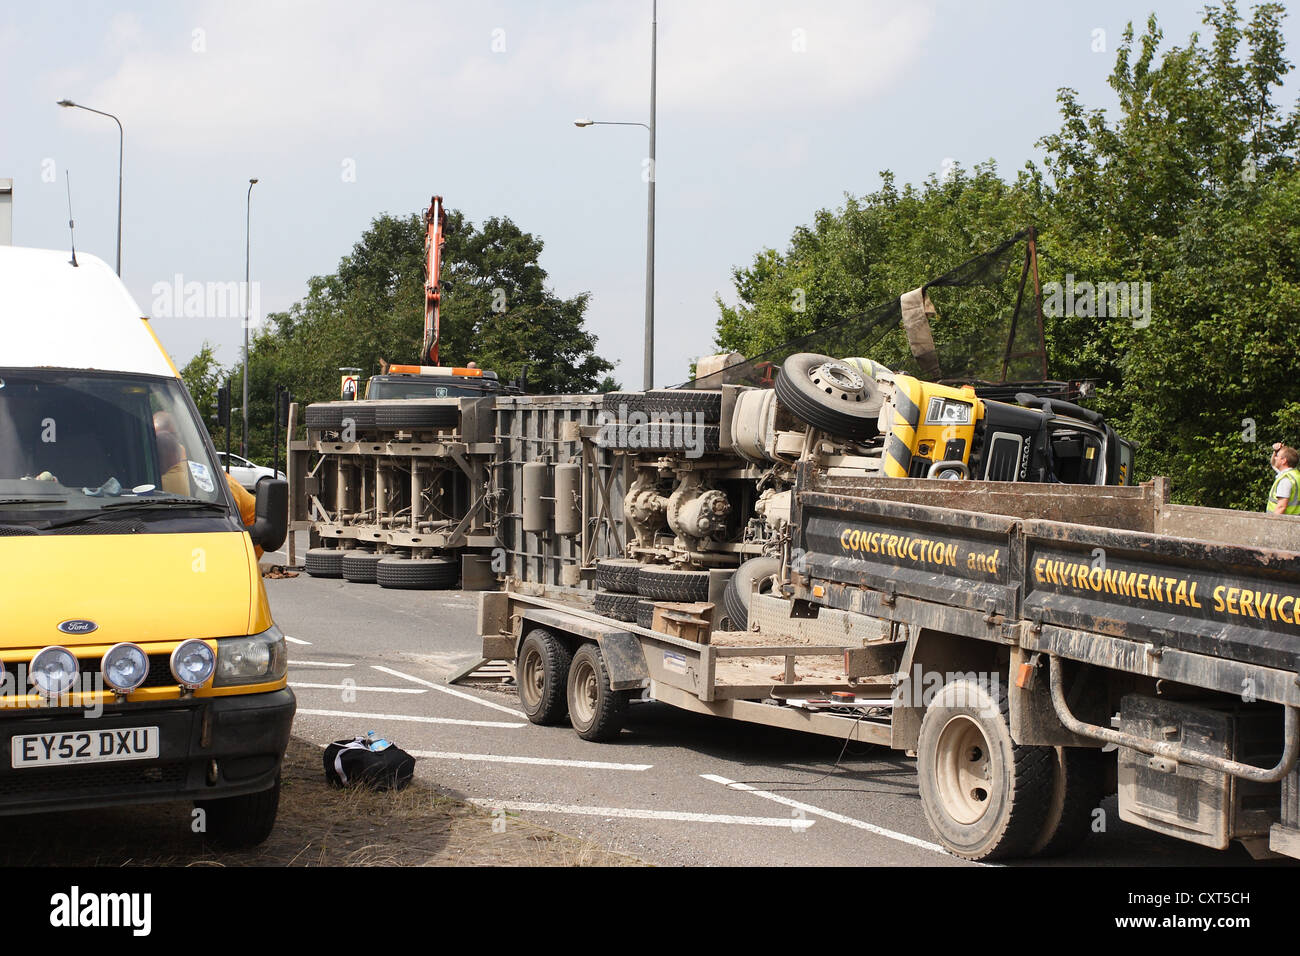 Truck on its side surrounded by vehicles Stock Photo